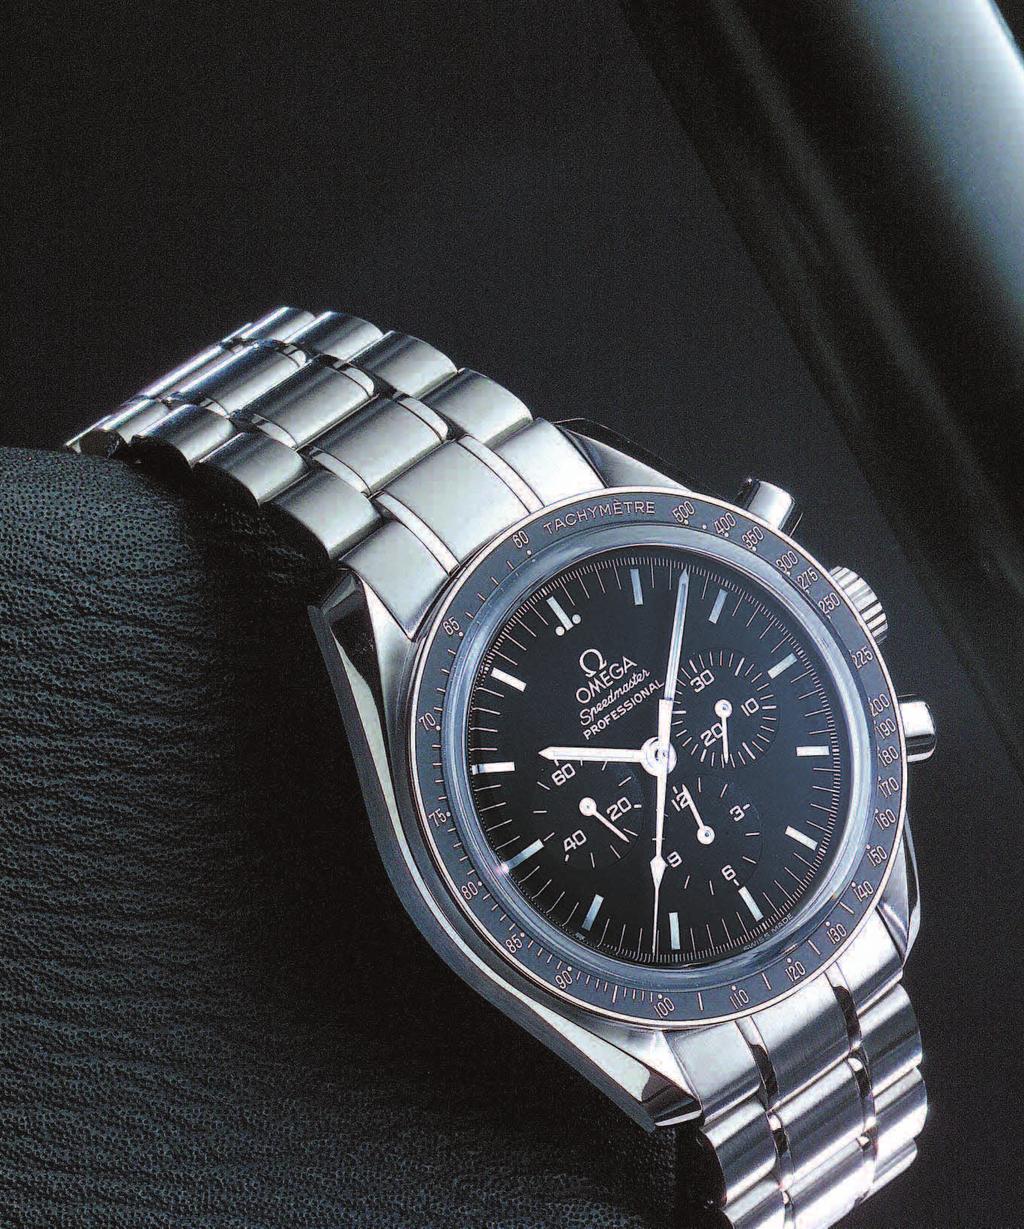 The People's Choice The most popular Omega versus the best-selling Breitling! What makes these watches so fascinating?